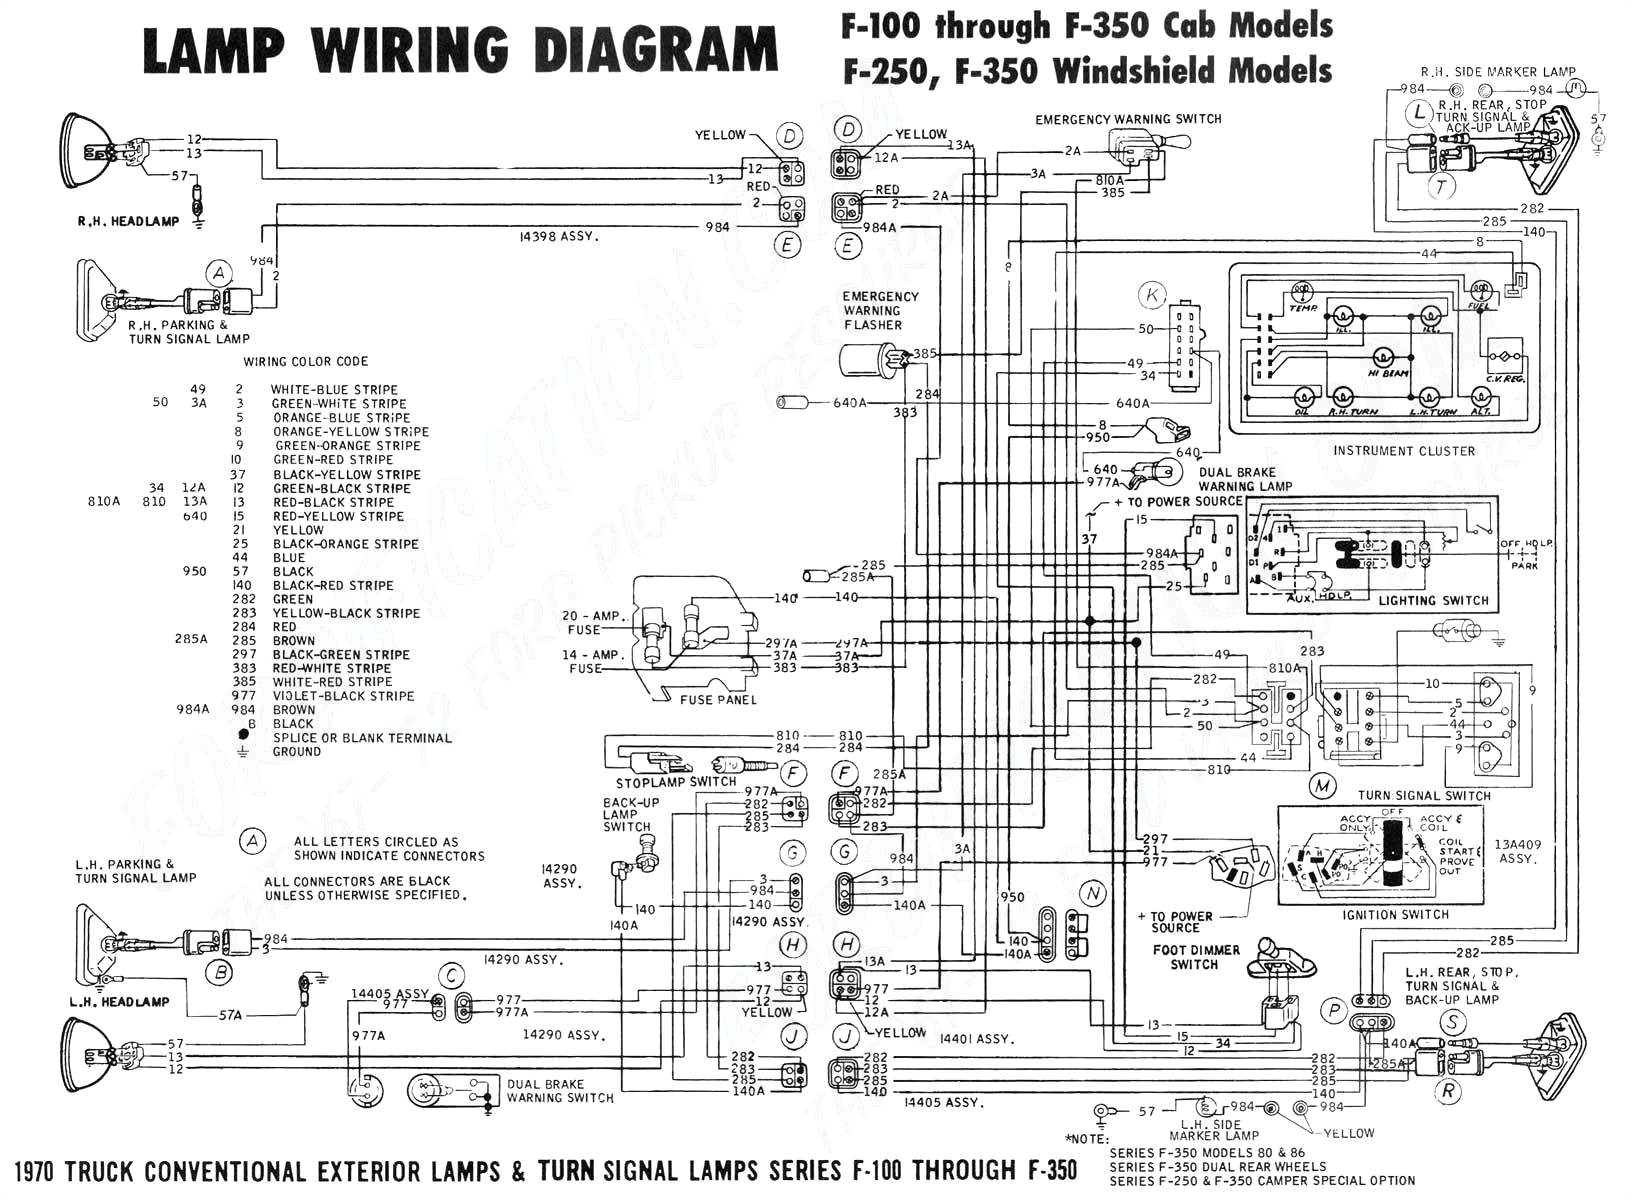 2000 jeep wiring diagram fresh wiring diagram for starter relay 2007 07 jeep grand cherokee wiring diagram